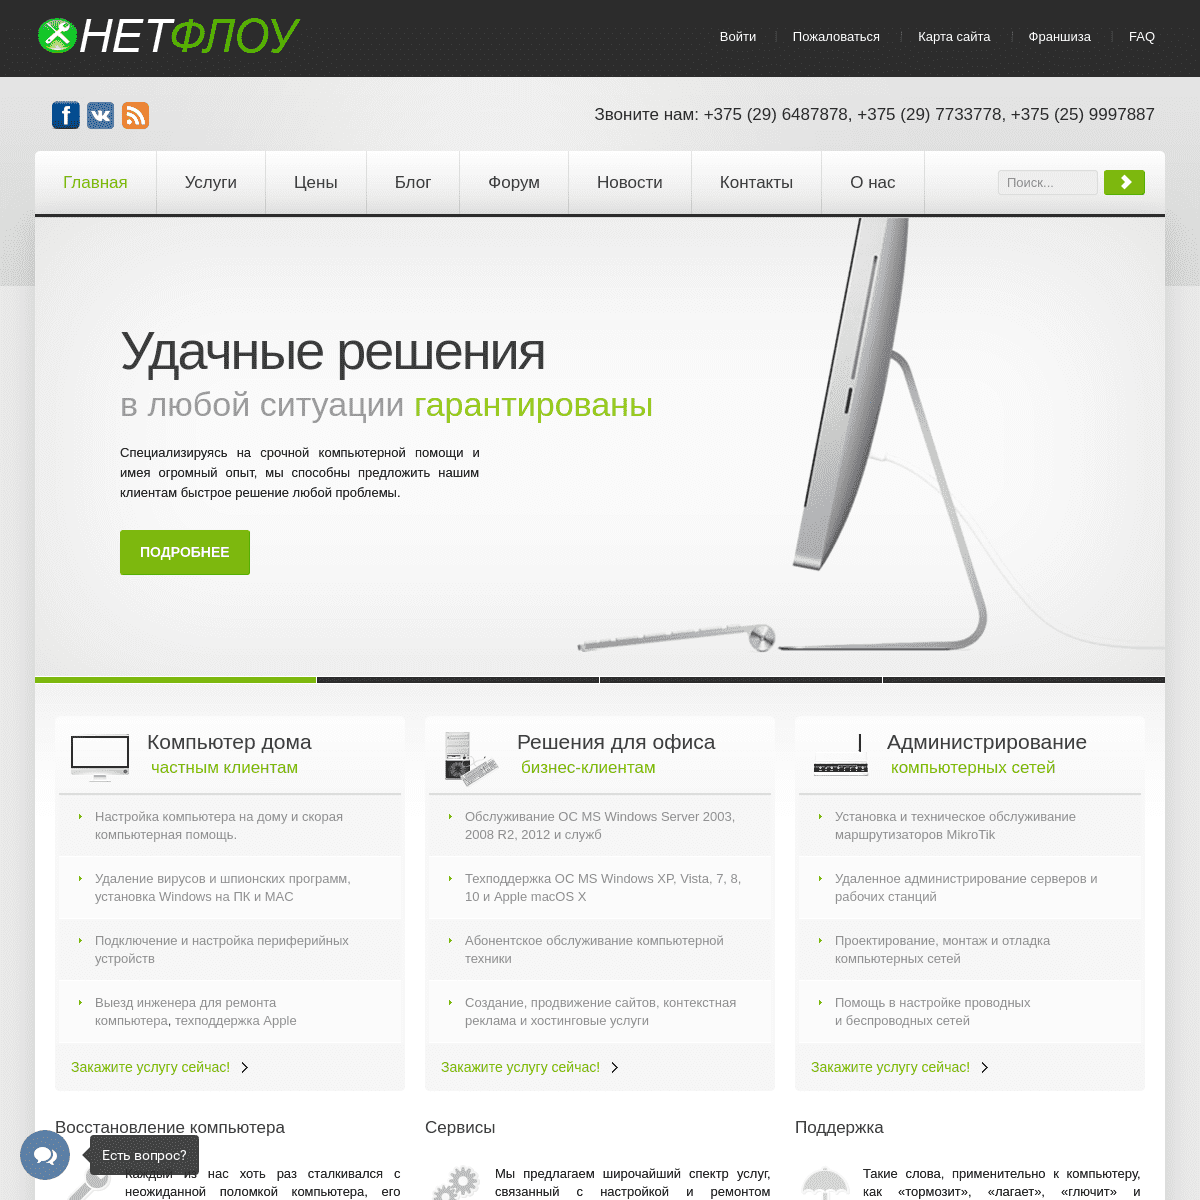 A complete backup of netflow.by